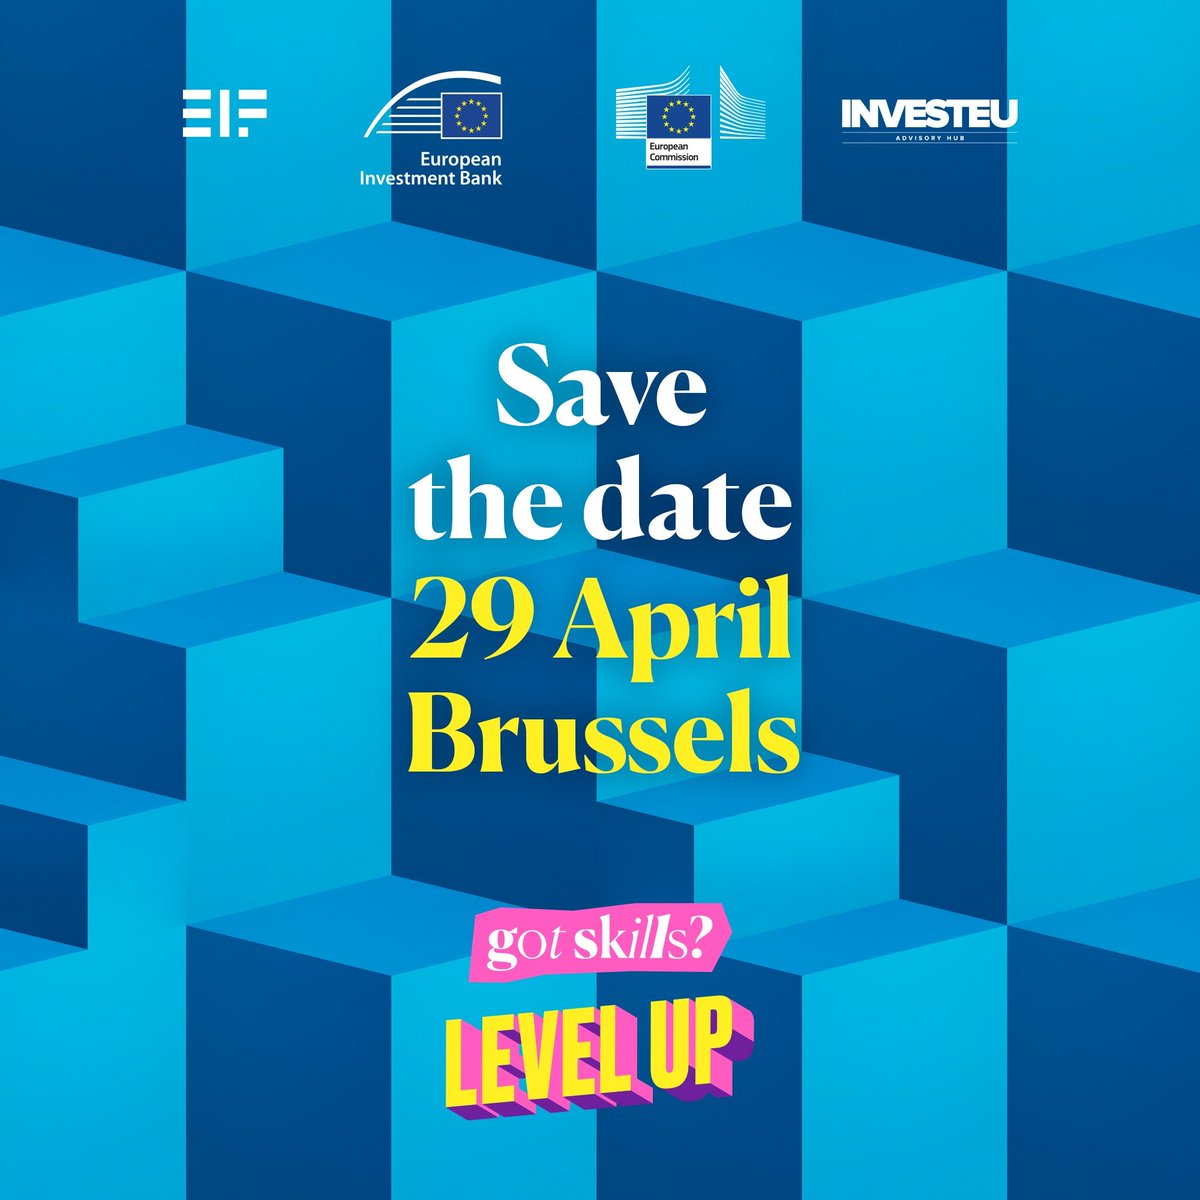 Save the date for our 'Got skills? Level Up!' event 📆 Join us on 29 April to explore the #skills gaps in Europe and how financing can play a part in solving the challenge. Fund managers, banks and student lending partners welcome to register soon. #InvestEU🇪🇺 #EIBAdvisory